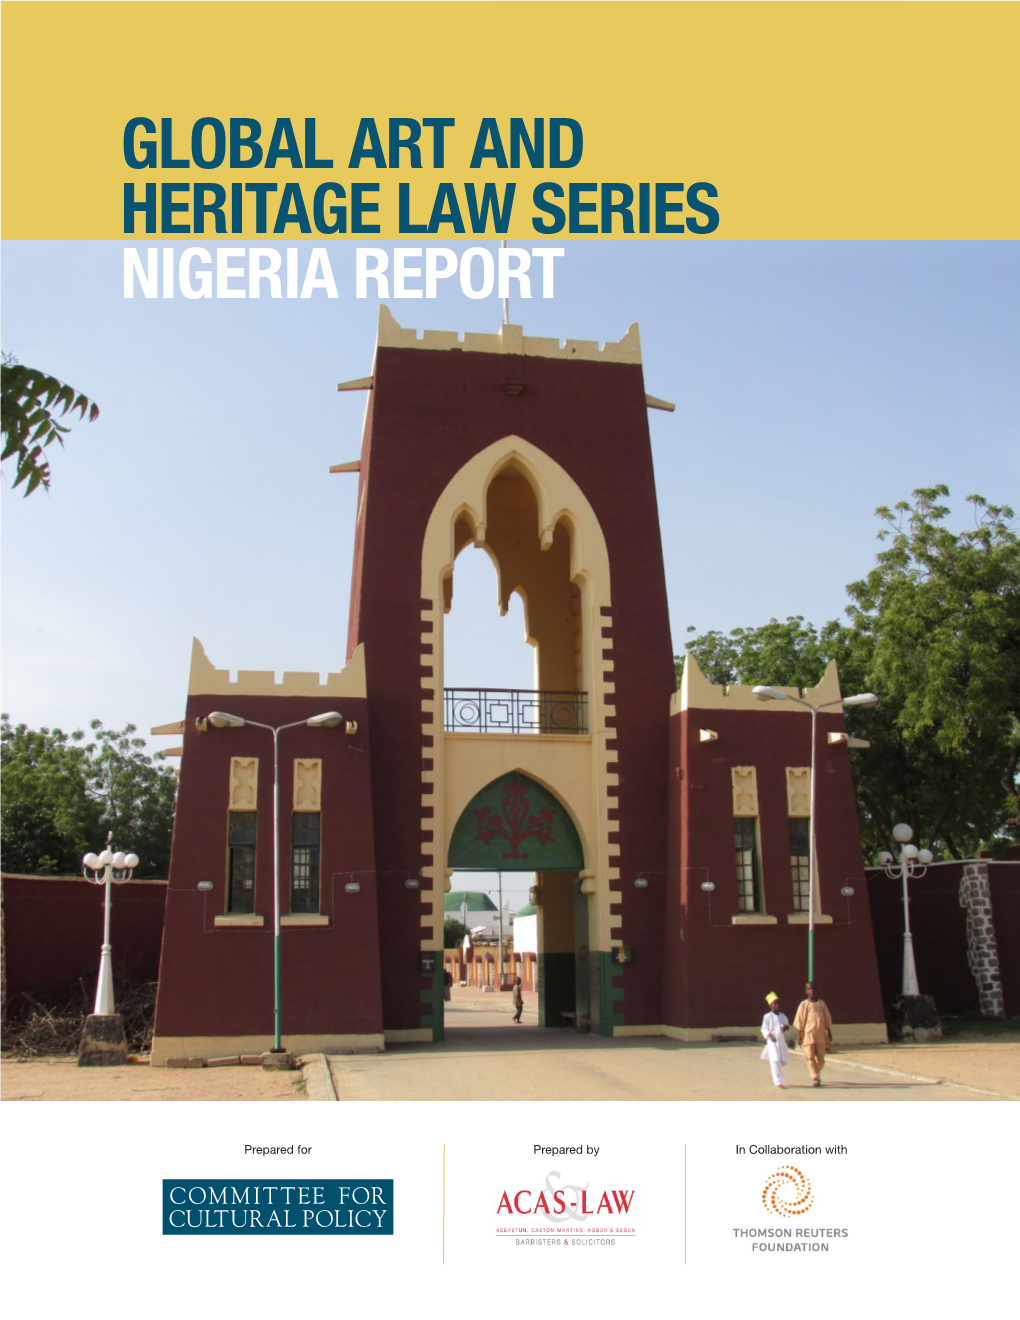 Global Art and Heritage Law Series Nigeria Report